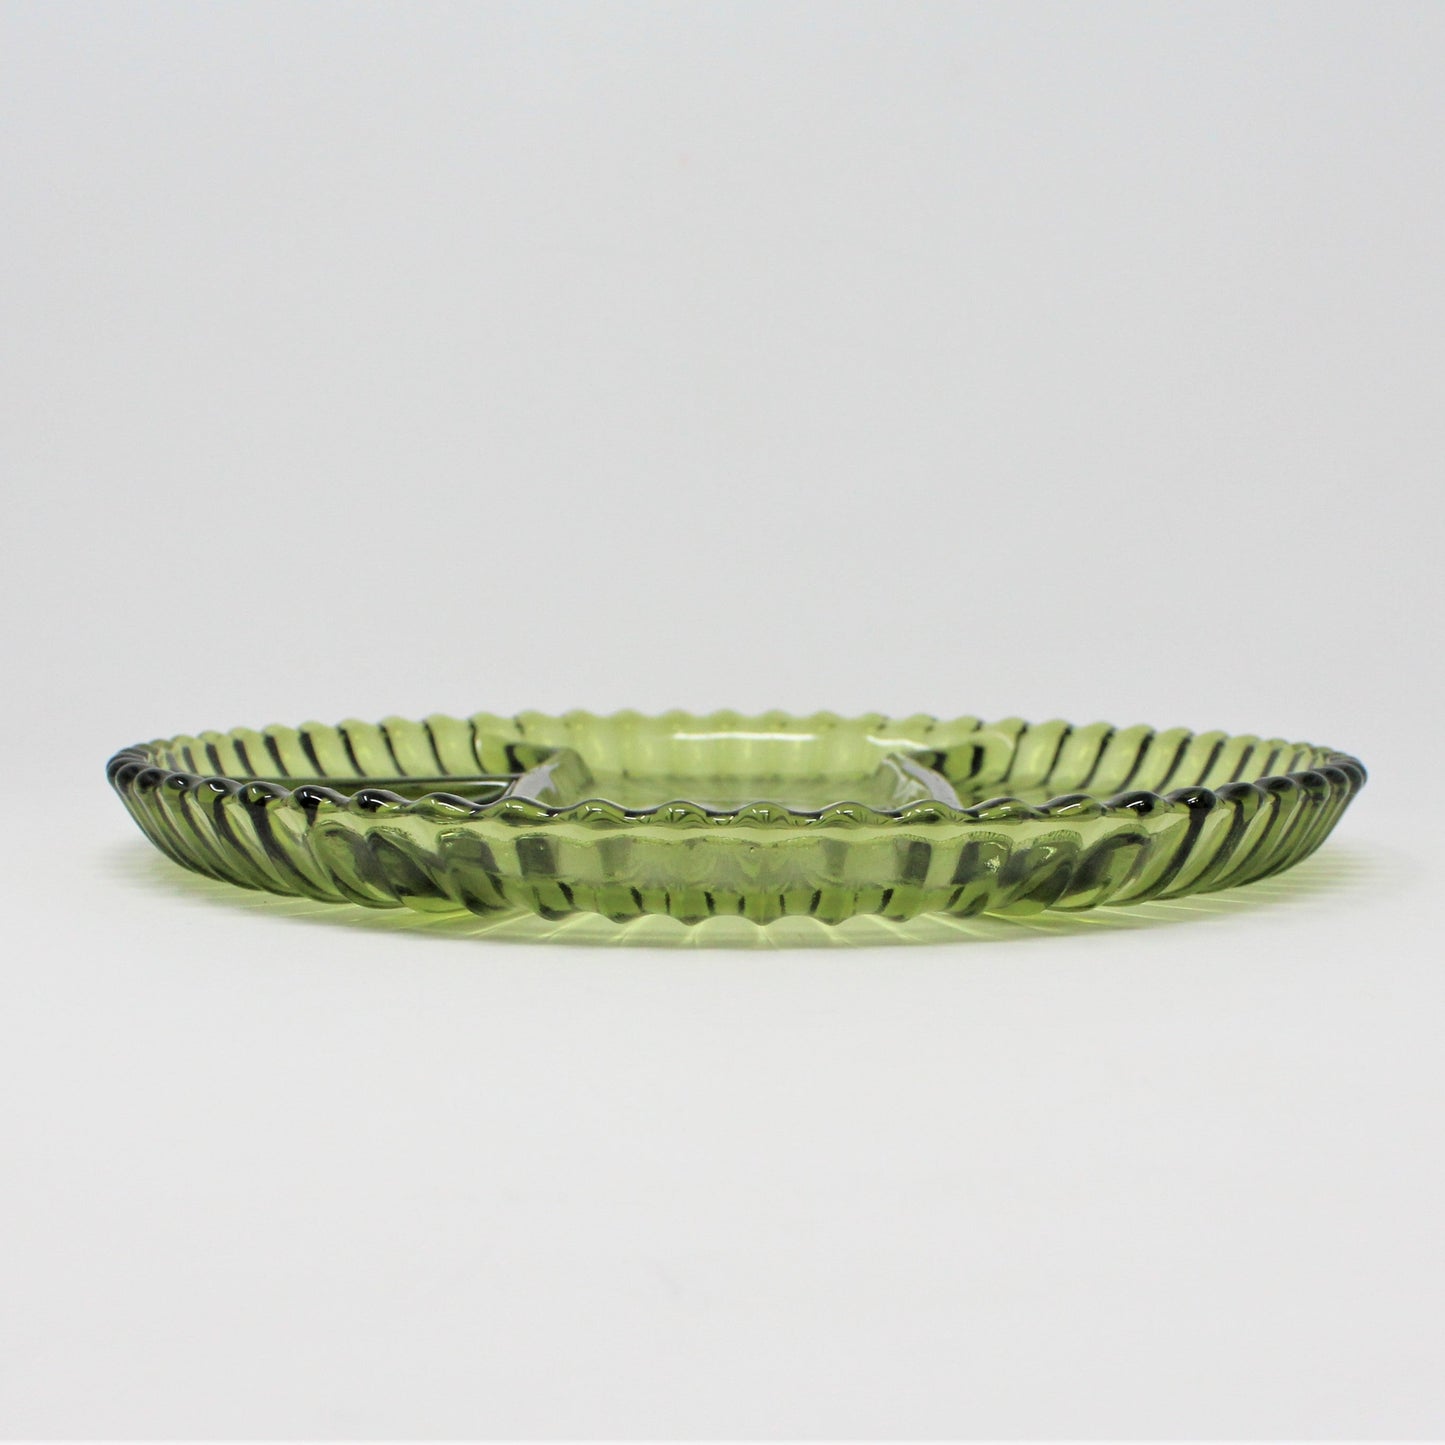 Divided Serving Plate, Indiana Glass, Avocado Green Line 260, Vintage